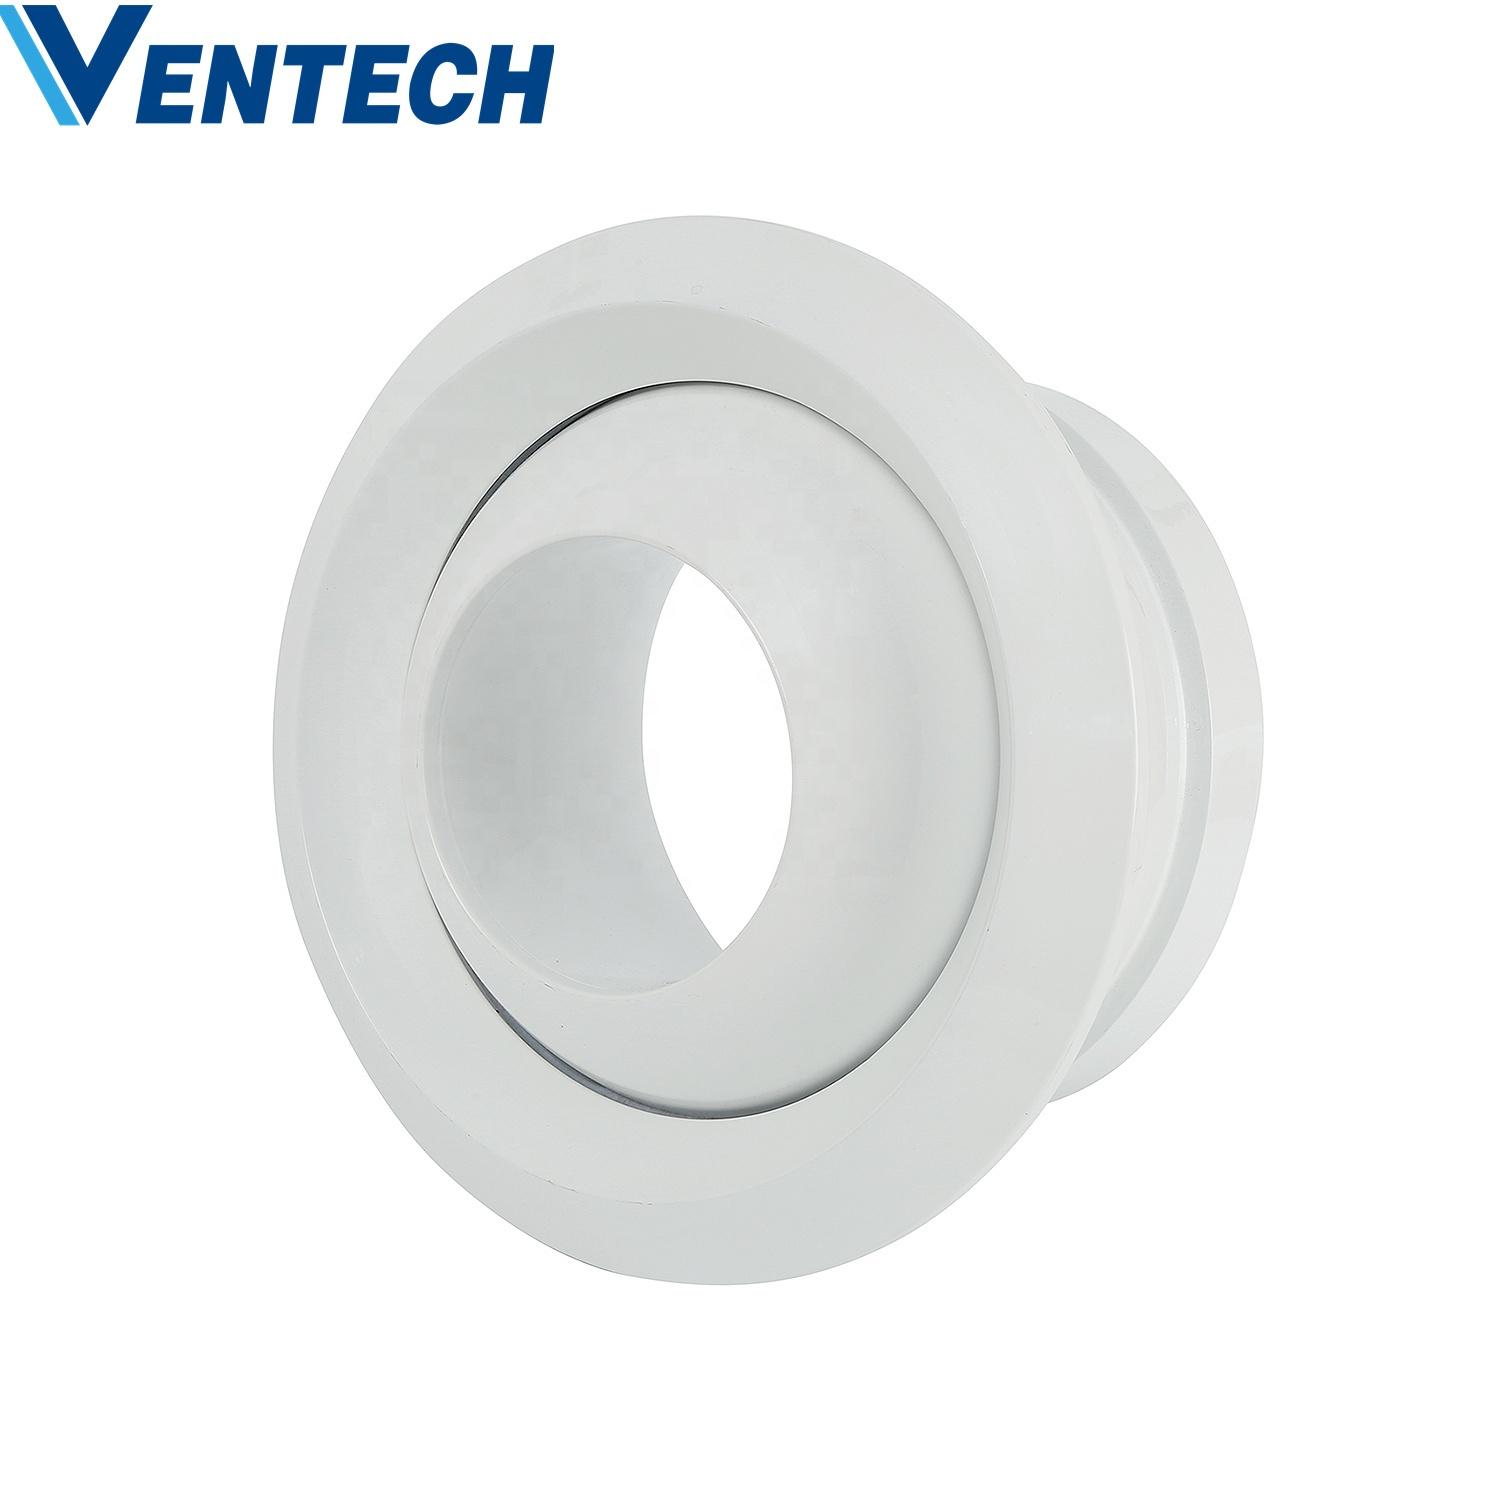 Hvac side wall mounted duct work ventilation round air grille ball jet diffuser